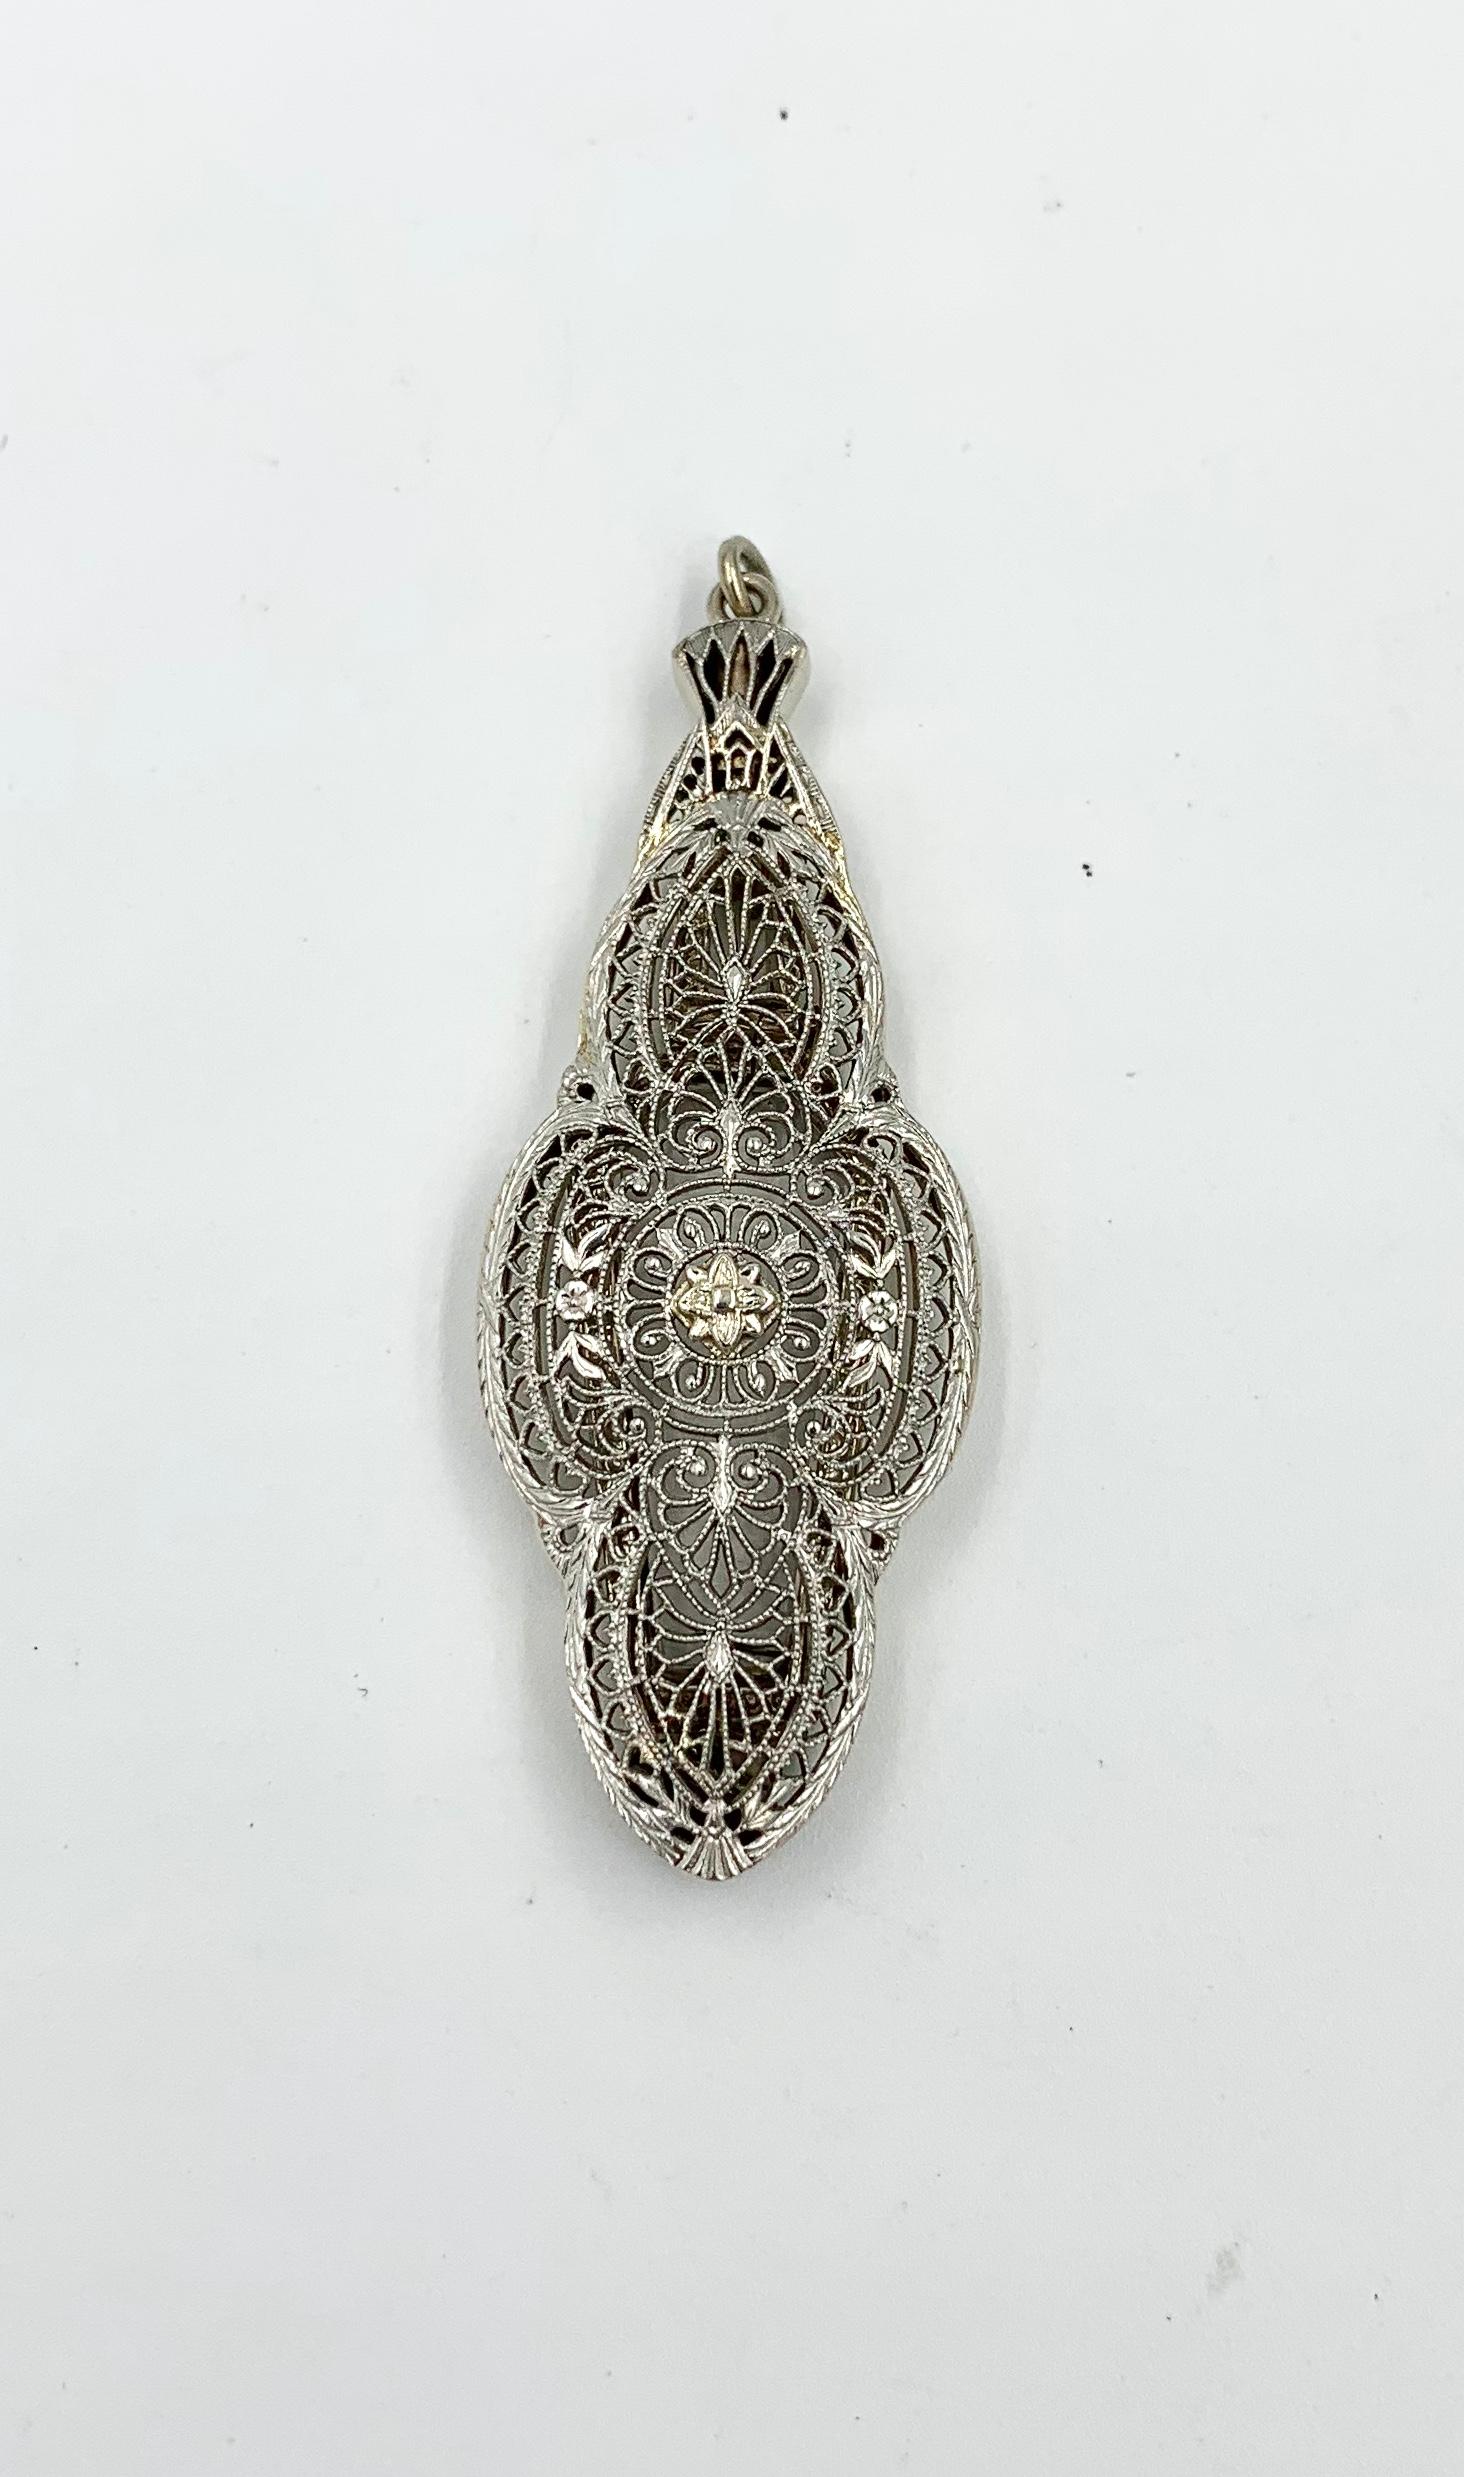 A stunning antique Victorian - Edwardian Magnifying Glass Pendant in 14 Karat White Gold.  A very rare jewel!  The beautiful pendant has stunning open work filigree design of great beauty.   The back of the pendant flips open to reveal a pair of